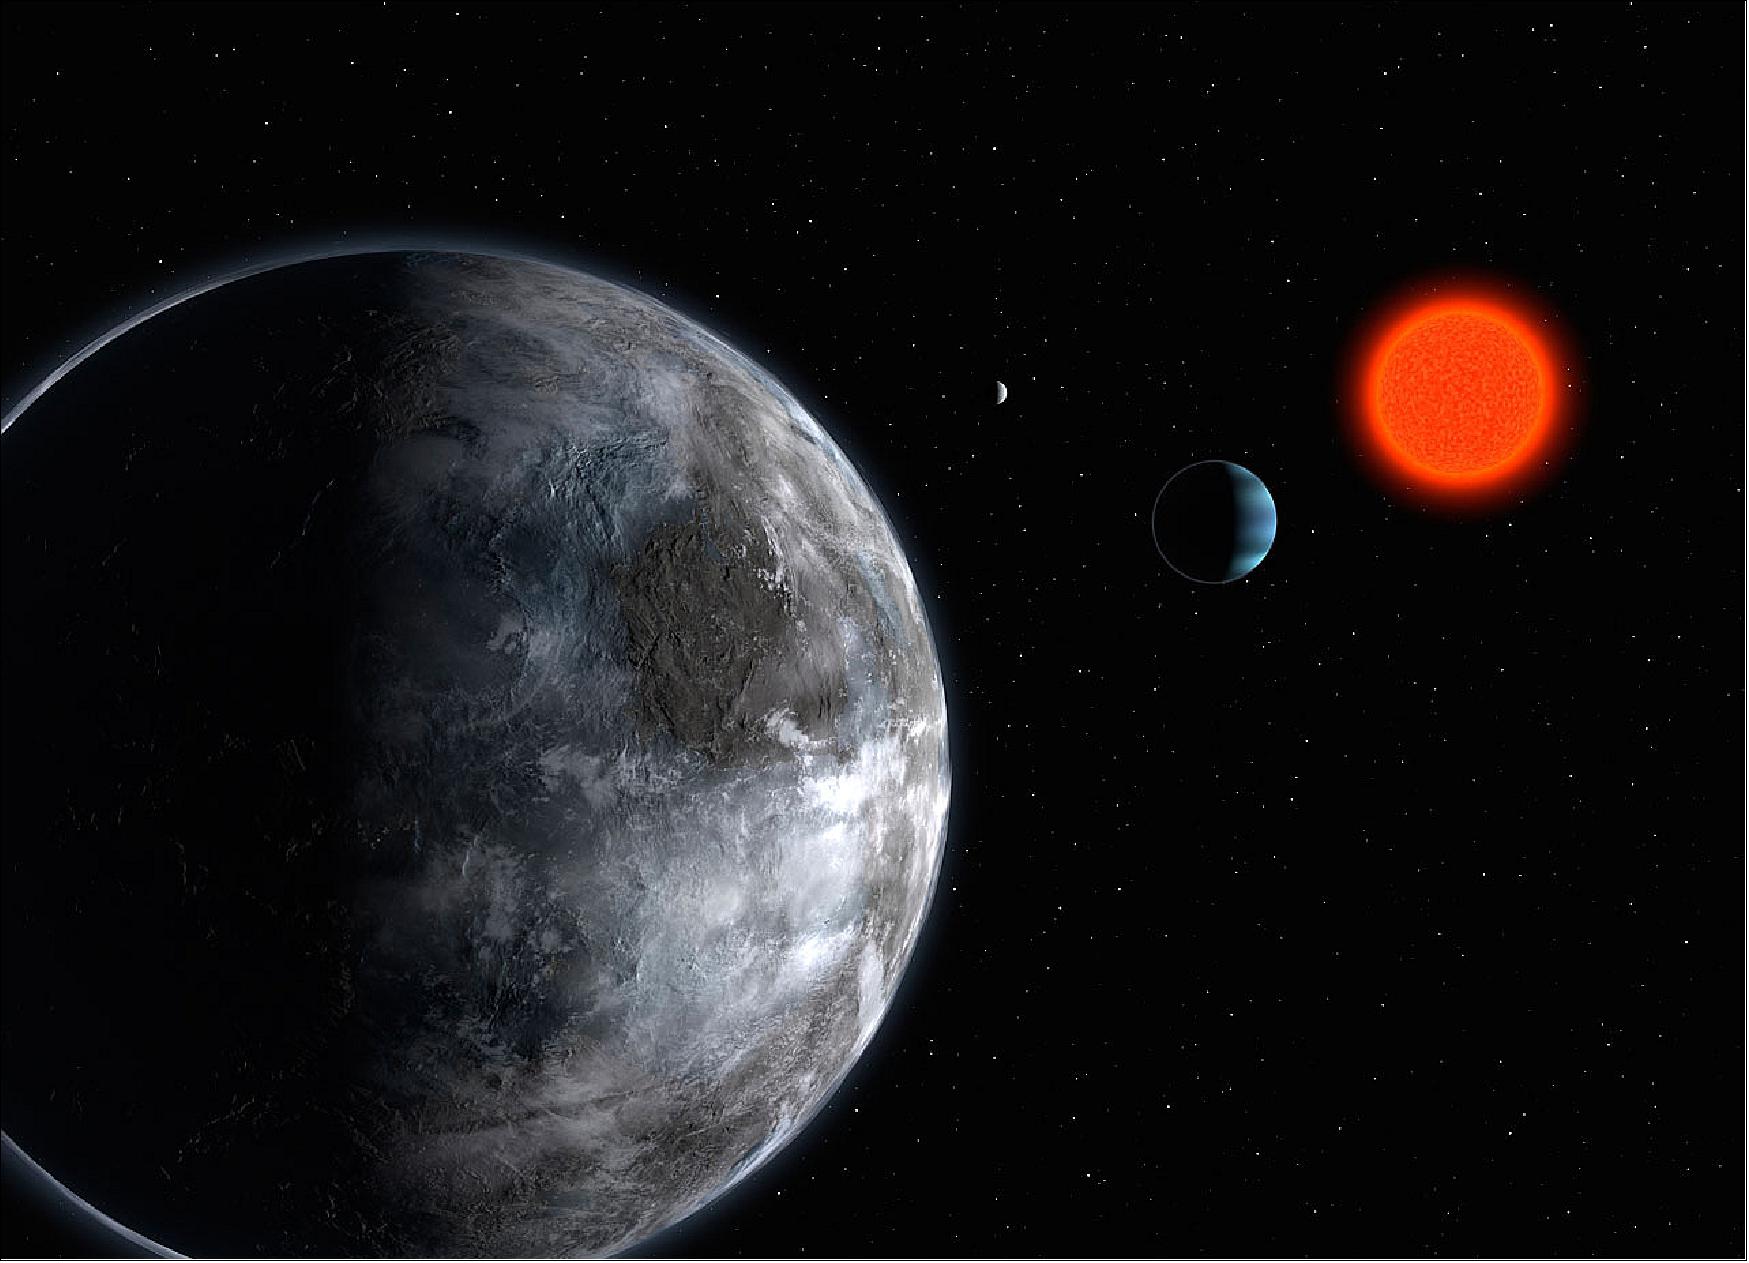 Figure 19: Artist's impression of the planetary system around the red dwarf Gliese 581. Using the instrument HARPS on the ESO 3.6 m telescope, astronomers have uncovered 3 planets, all of relative low-mass: 5, 8 and 15 Earth masses. The five Earth-mass planet (seen in foreground - Gliese 581 c) makes a full orbit around the star in 13 days, the other two in 5 (the blue, Neptunian-like planet - Gliese 581 b) and 84 days (the most remote one, Gliese 581 d), image credit: ESO